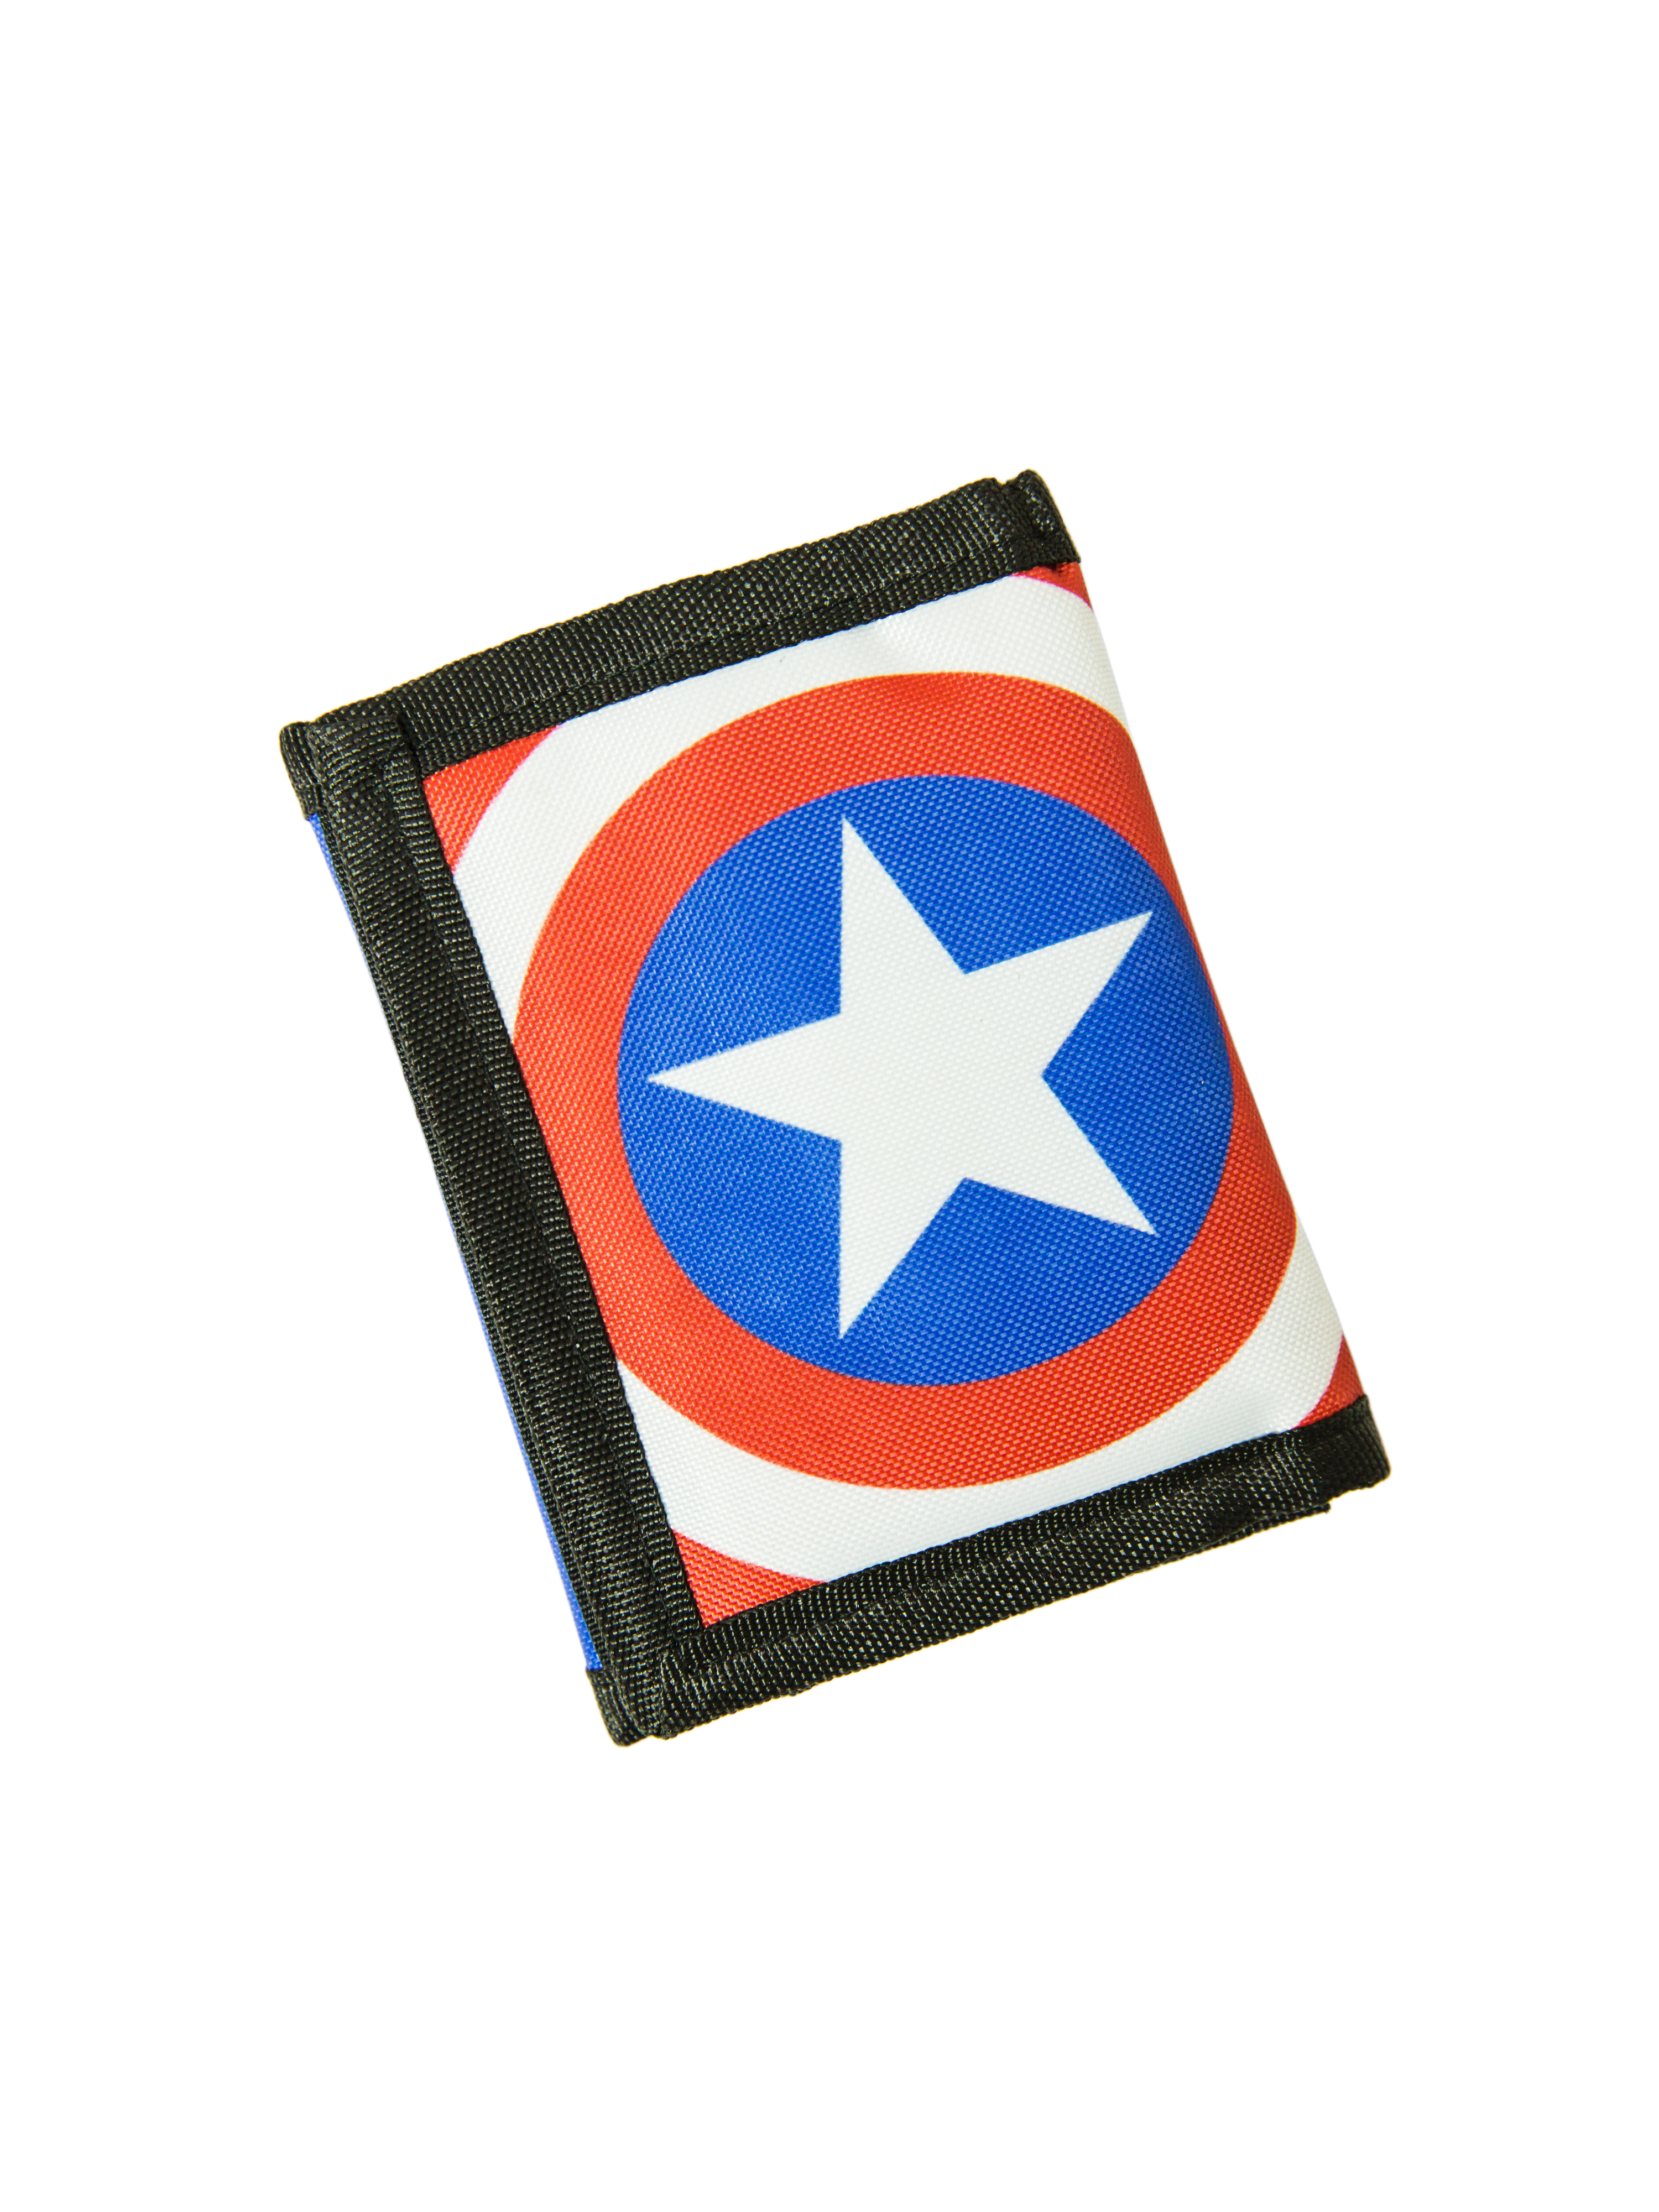 Marvel Avengers Boys Baseball Hat And Tri-Fold Wallet Combo, Youth Size - image 4 of 6